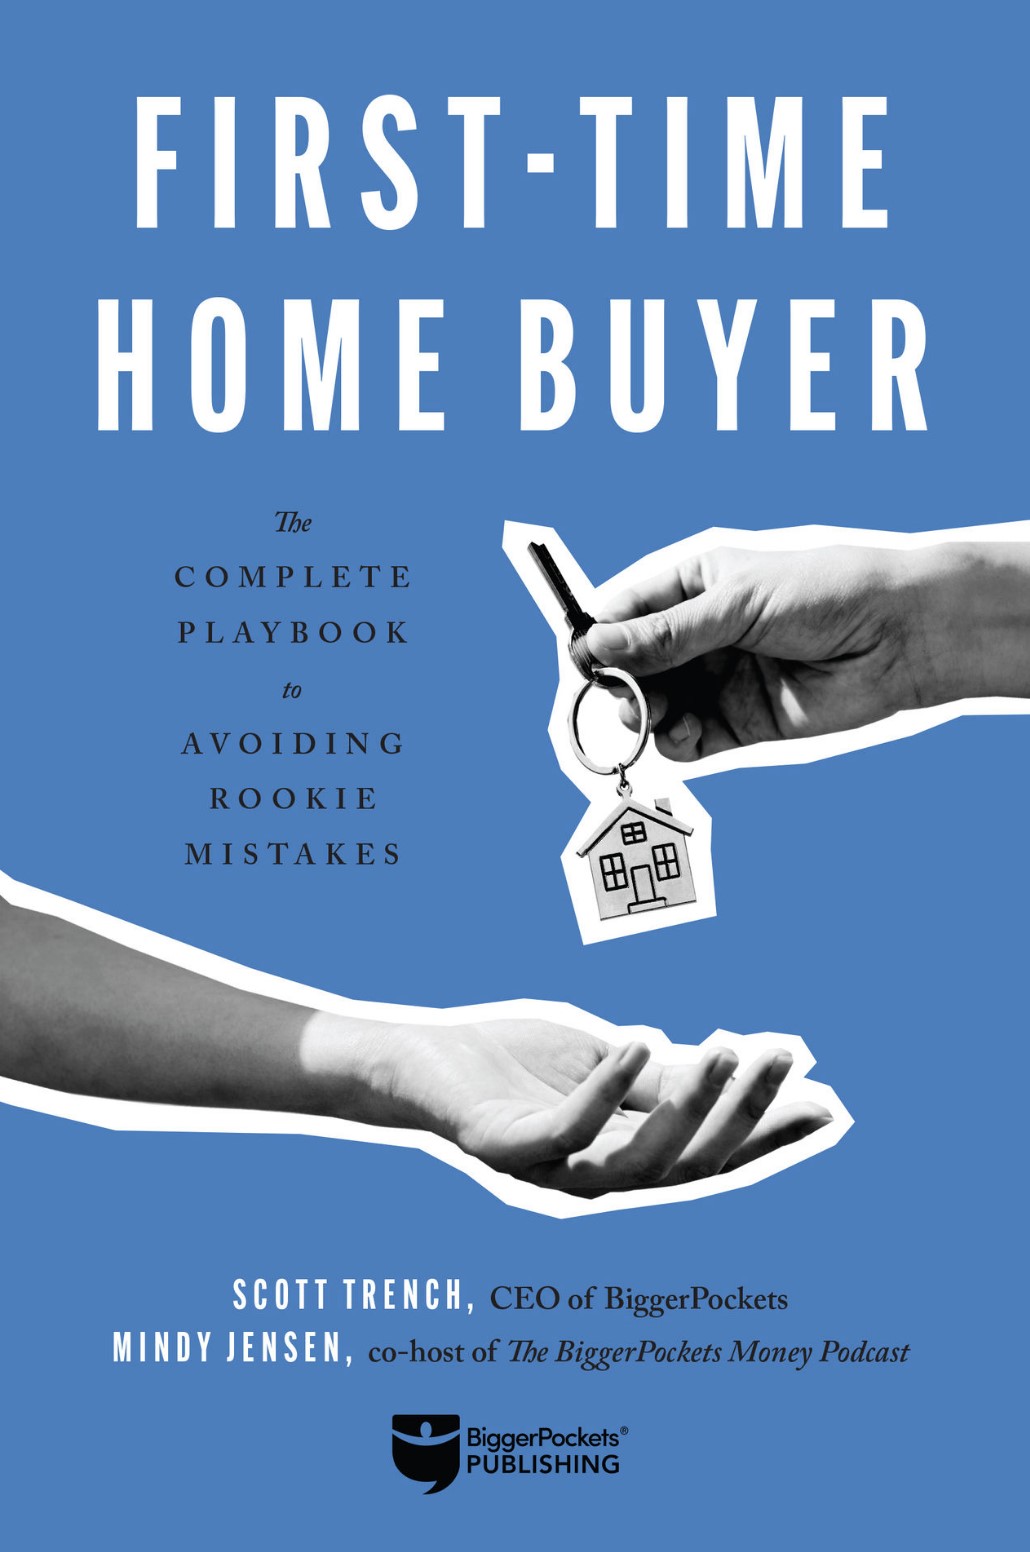 5 great reads for first-time homebuyers